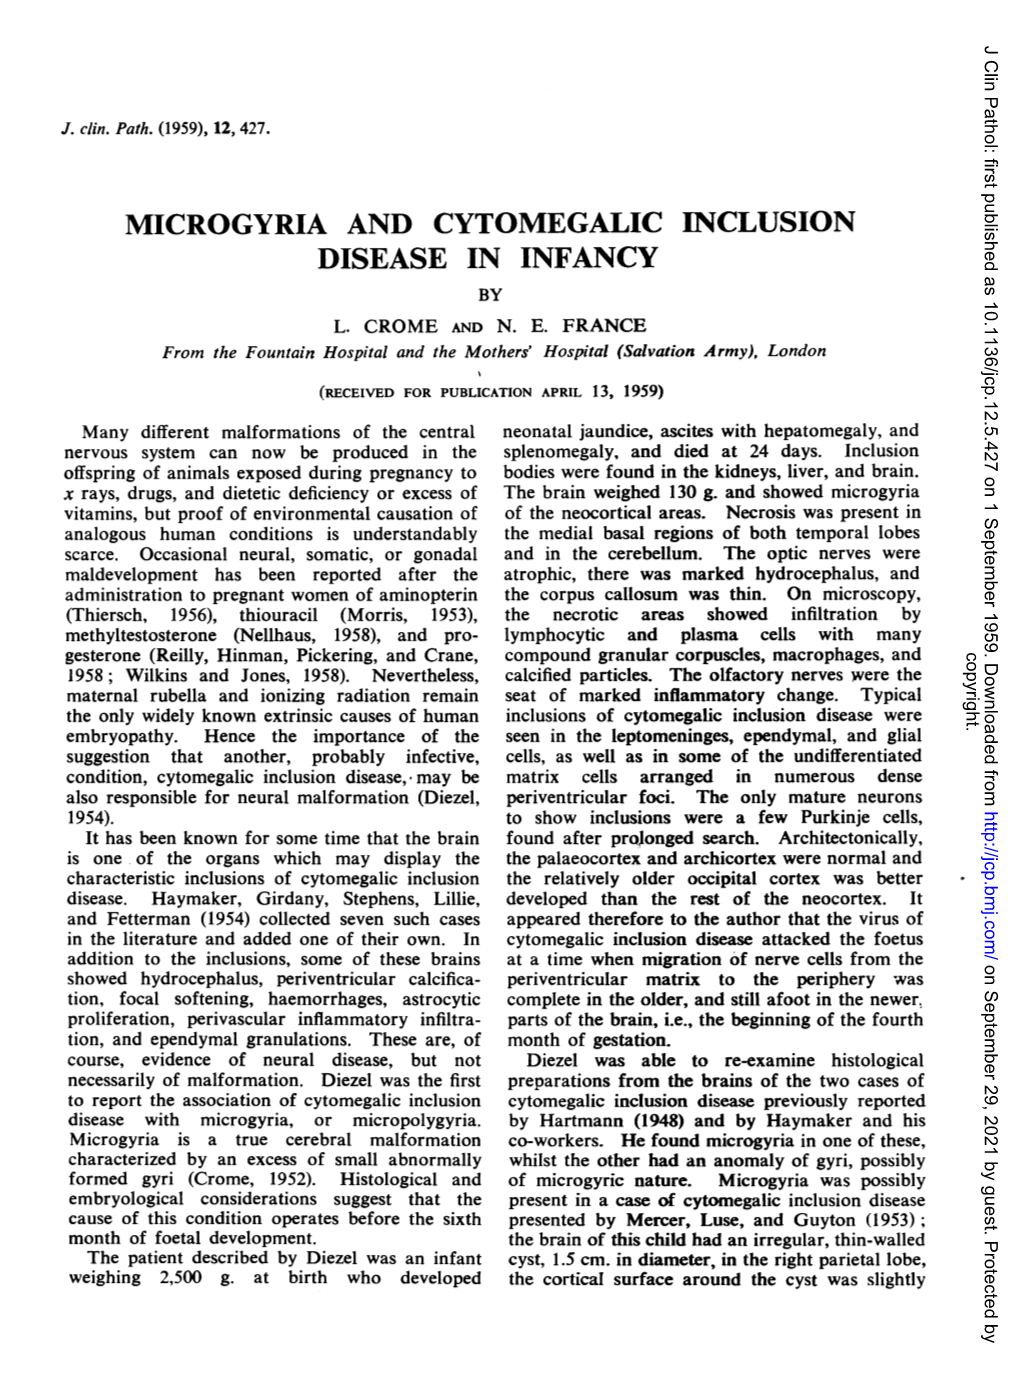 Microgyria and Cytomegalic Inclusion Disease in Infancy by L